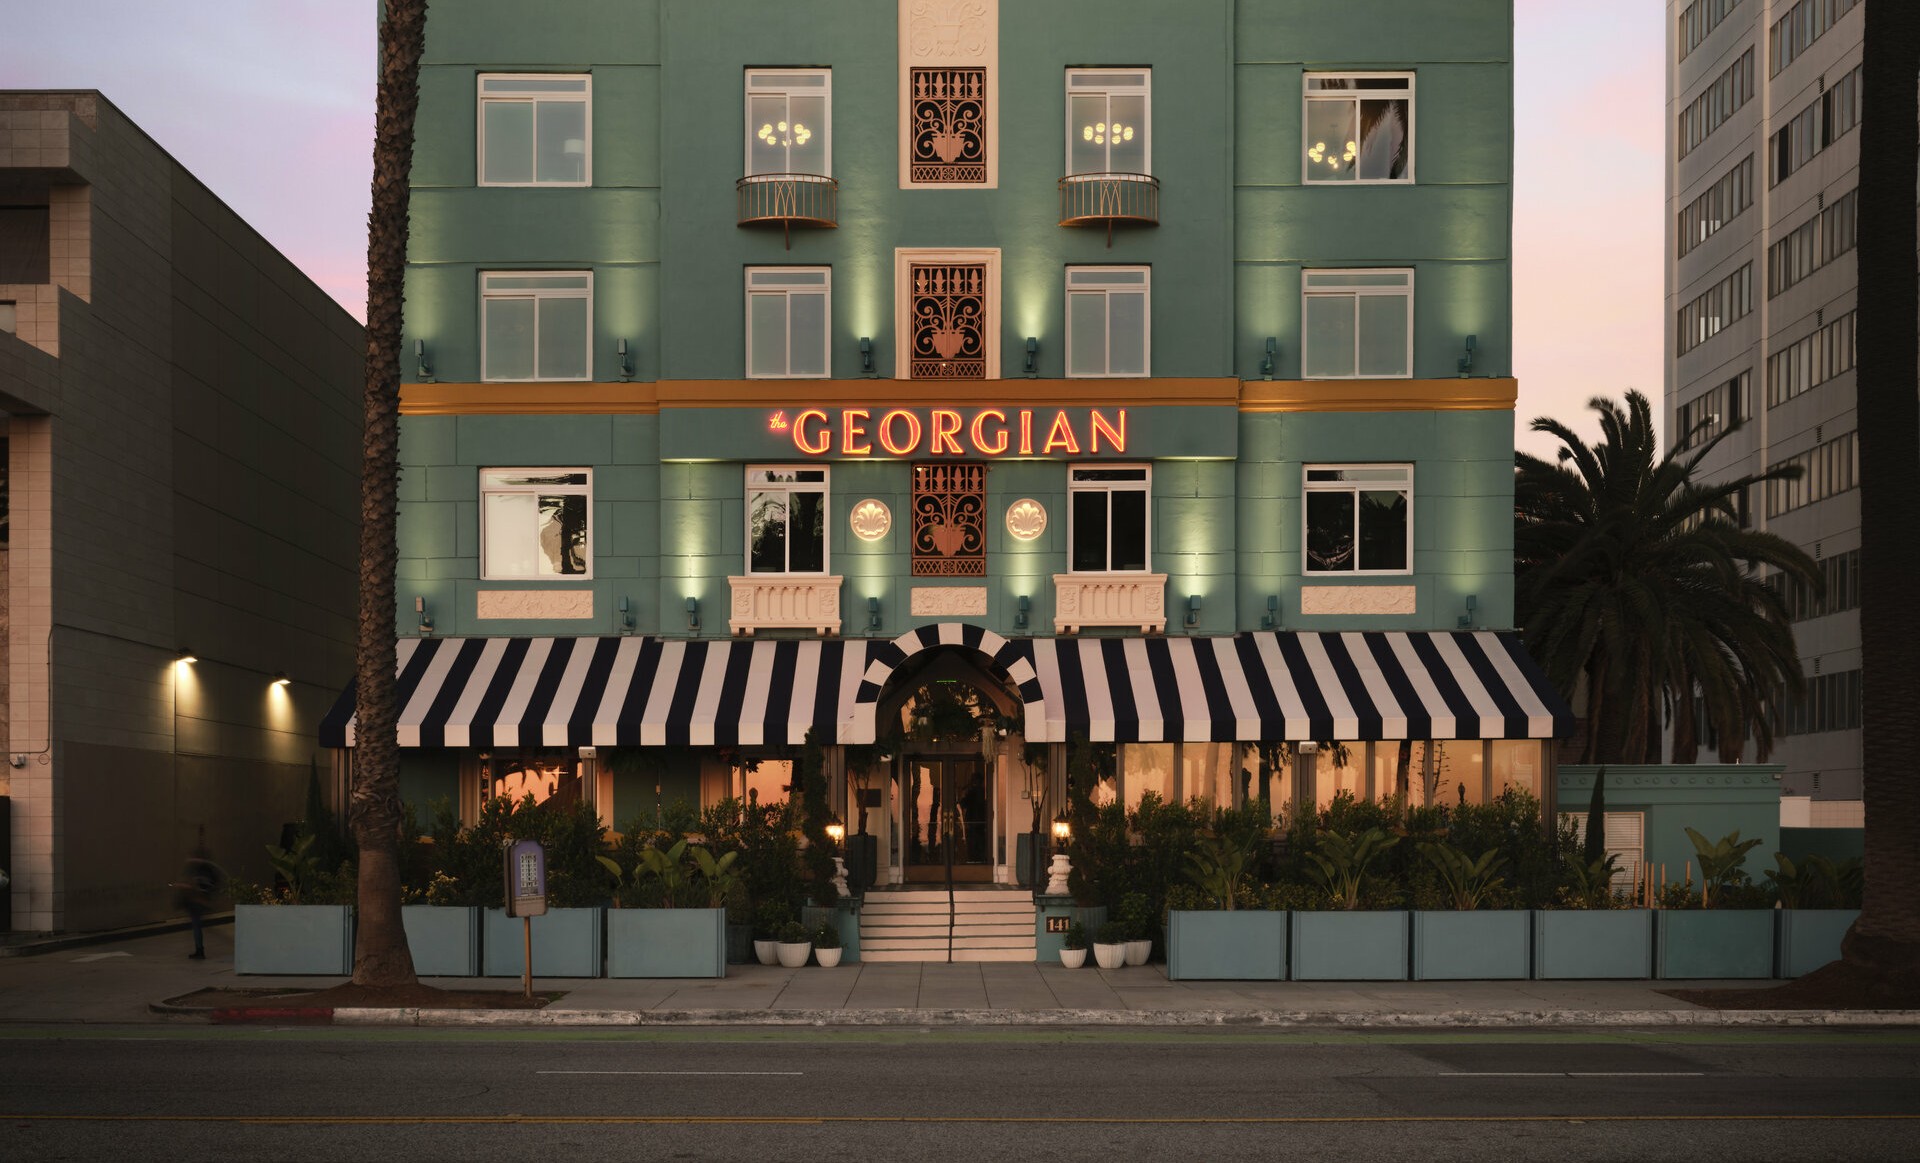 HISTORIC OCEANFRONT HOTEL, THE GEORGIAN, RE-LAUNCHES IN SANTA MONICA  THE ICONIC 1930s PROPERTY WILL OFFICIALLY RE-OPEN ON APRIL 3, 2023